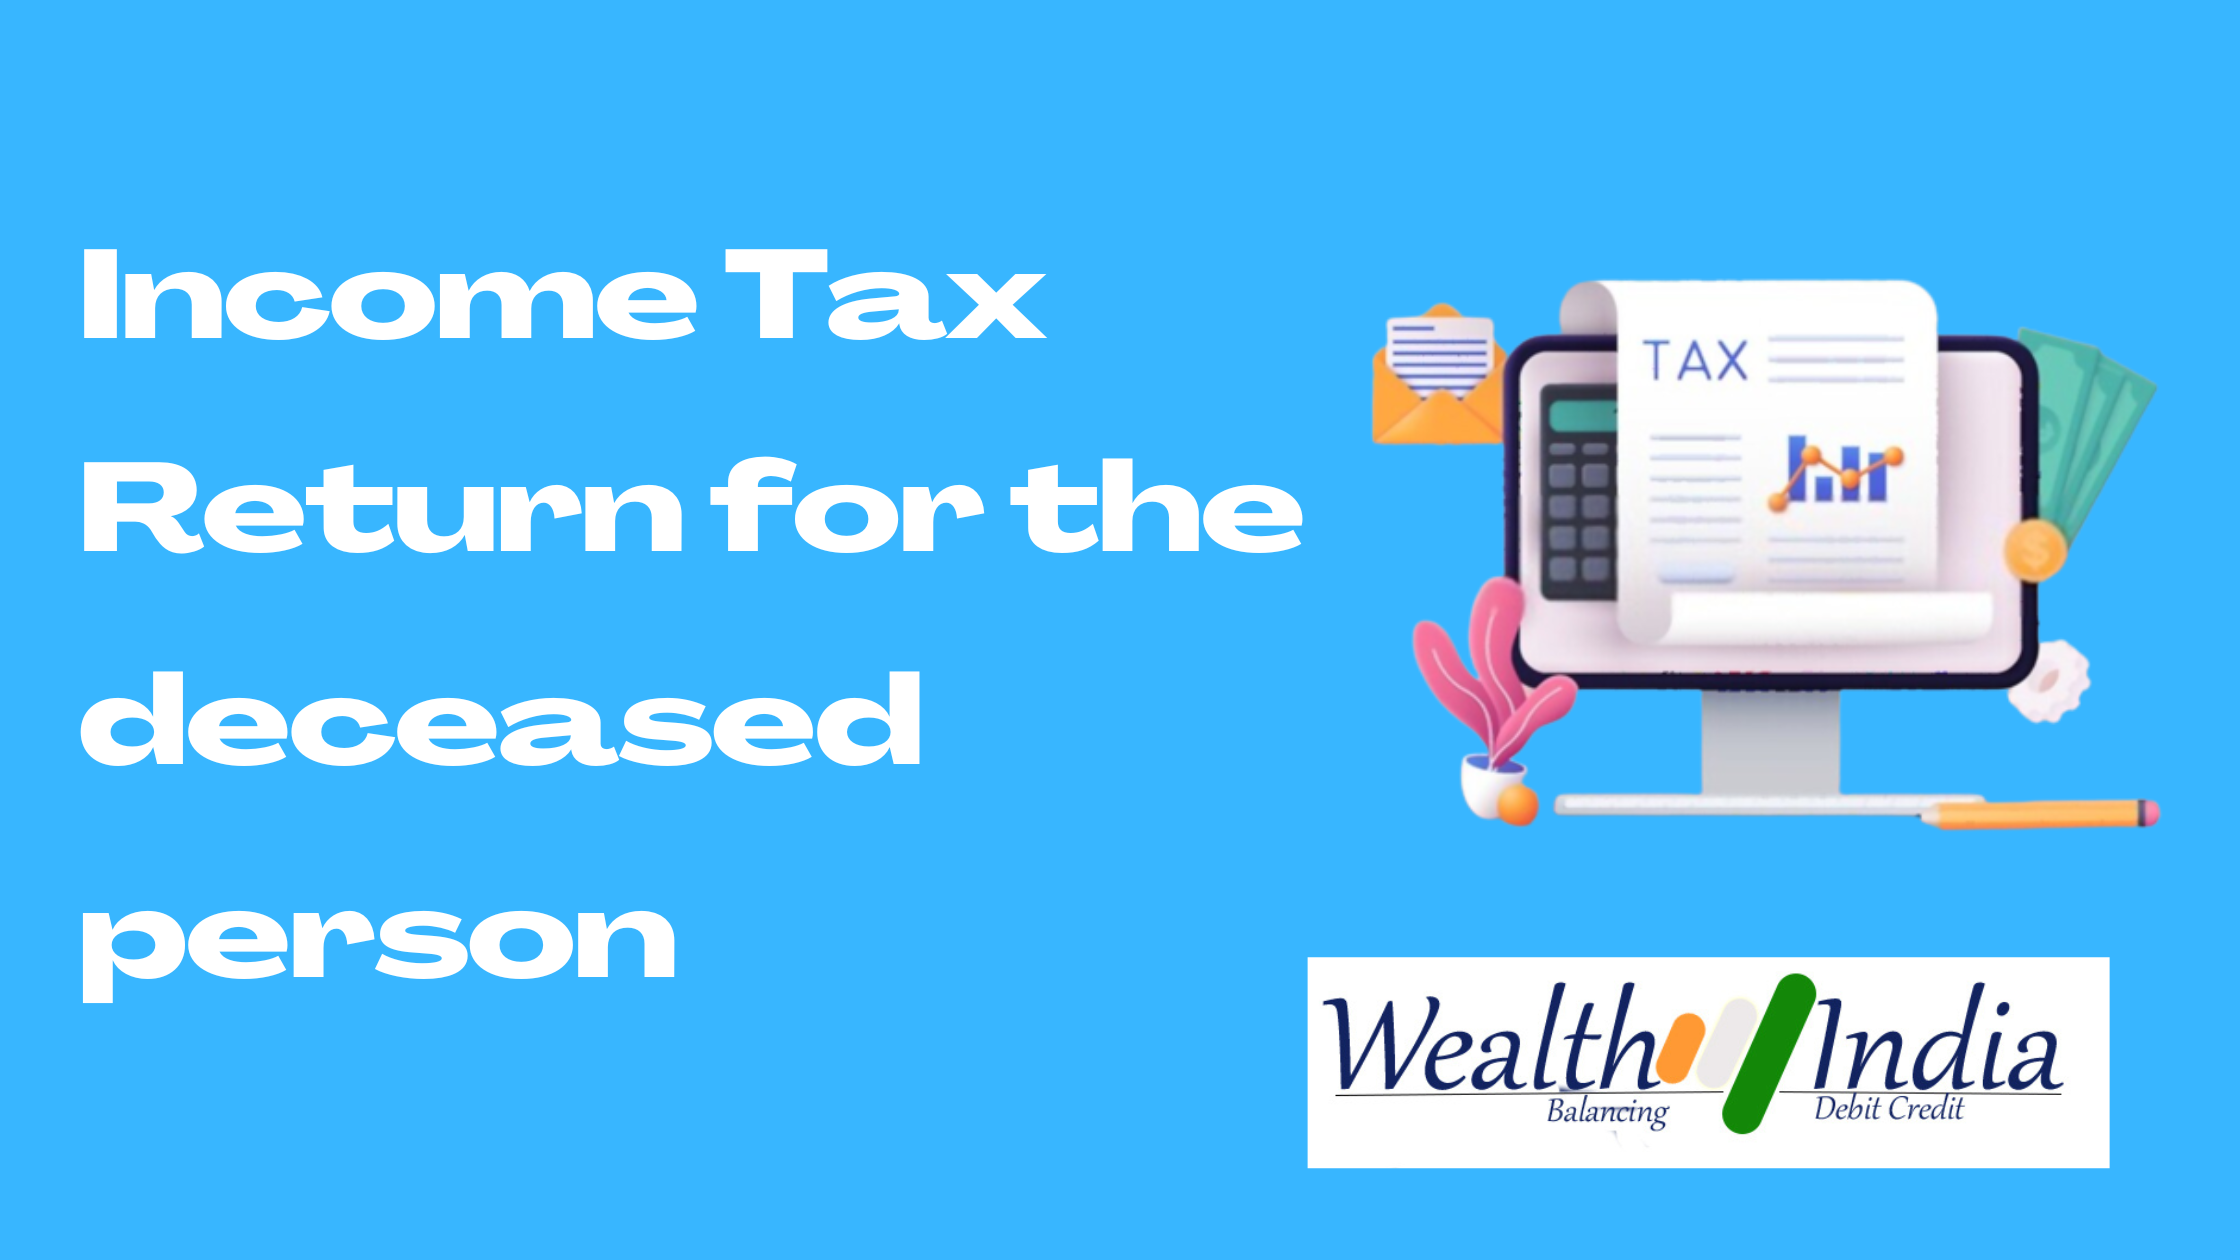 how-to-file-income-tax-return-for-the-deceased-person-by-legal-heir